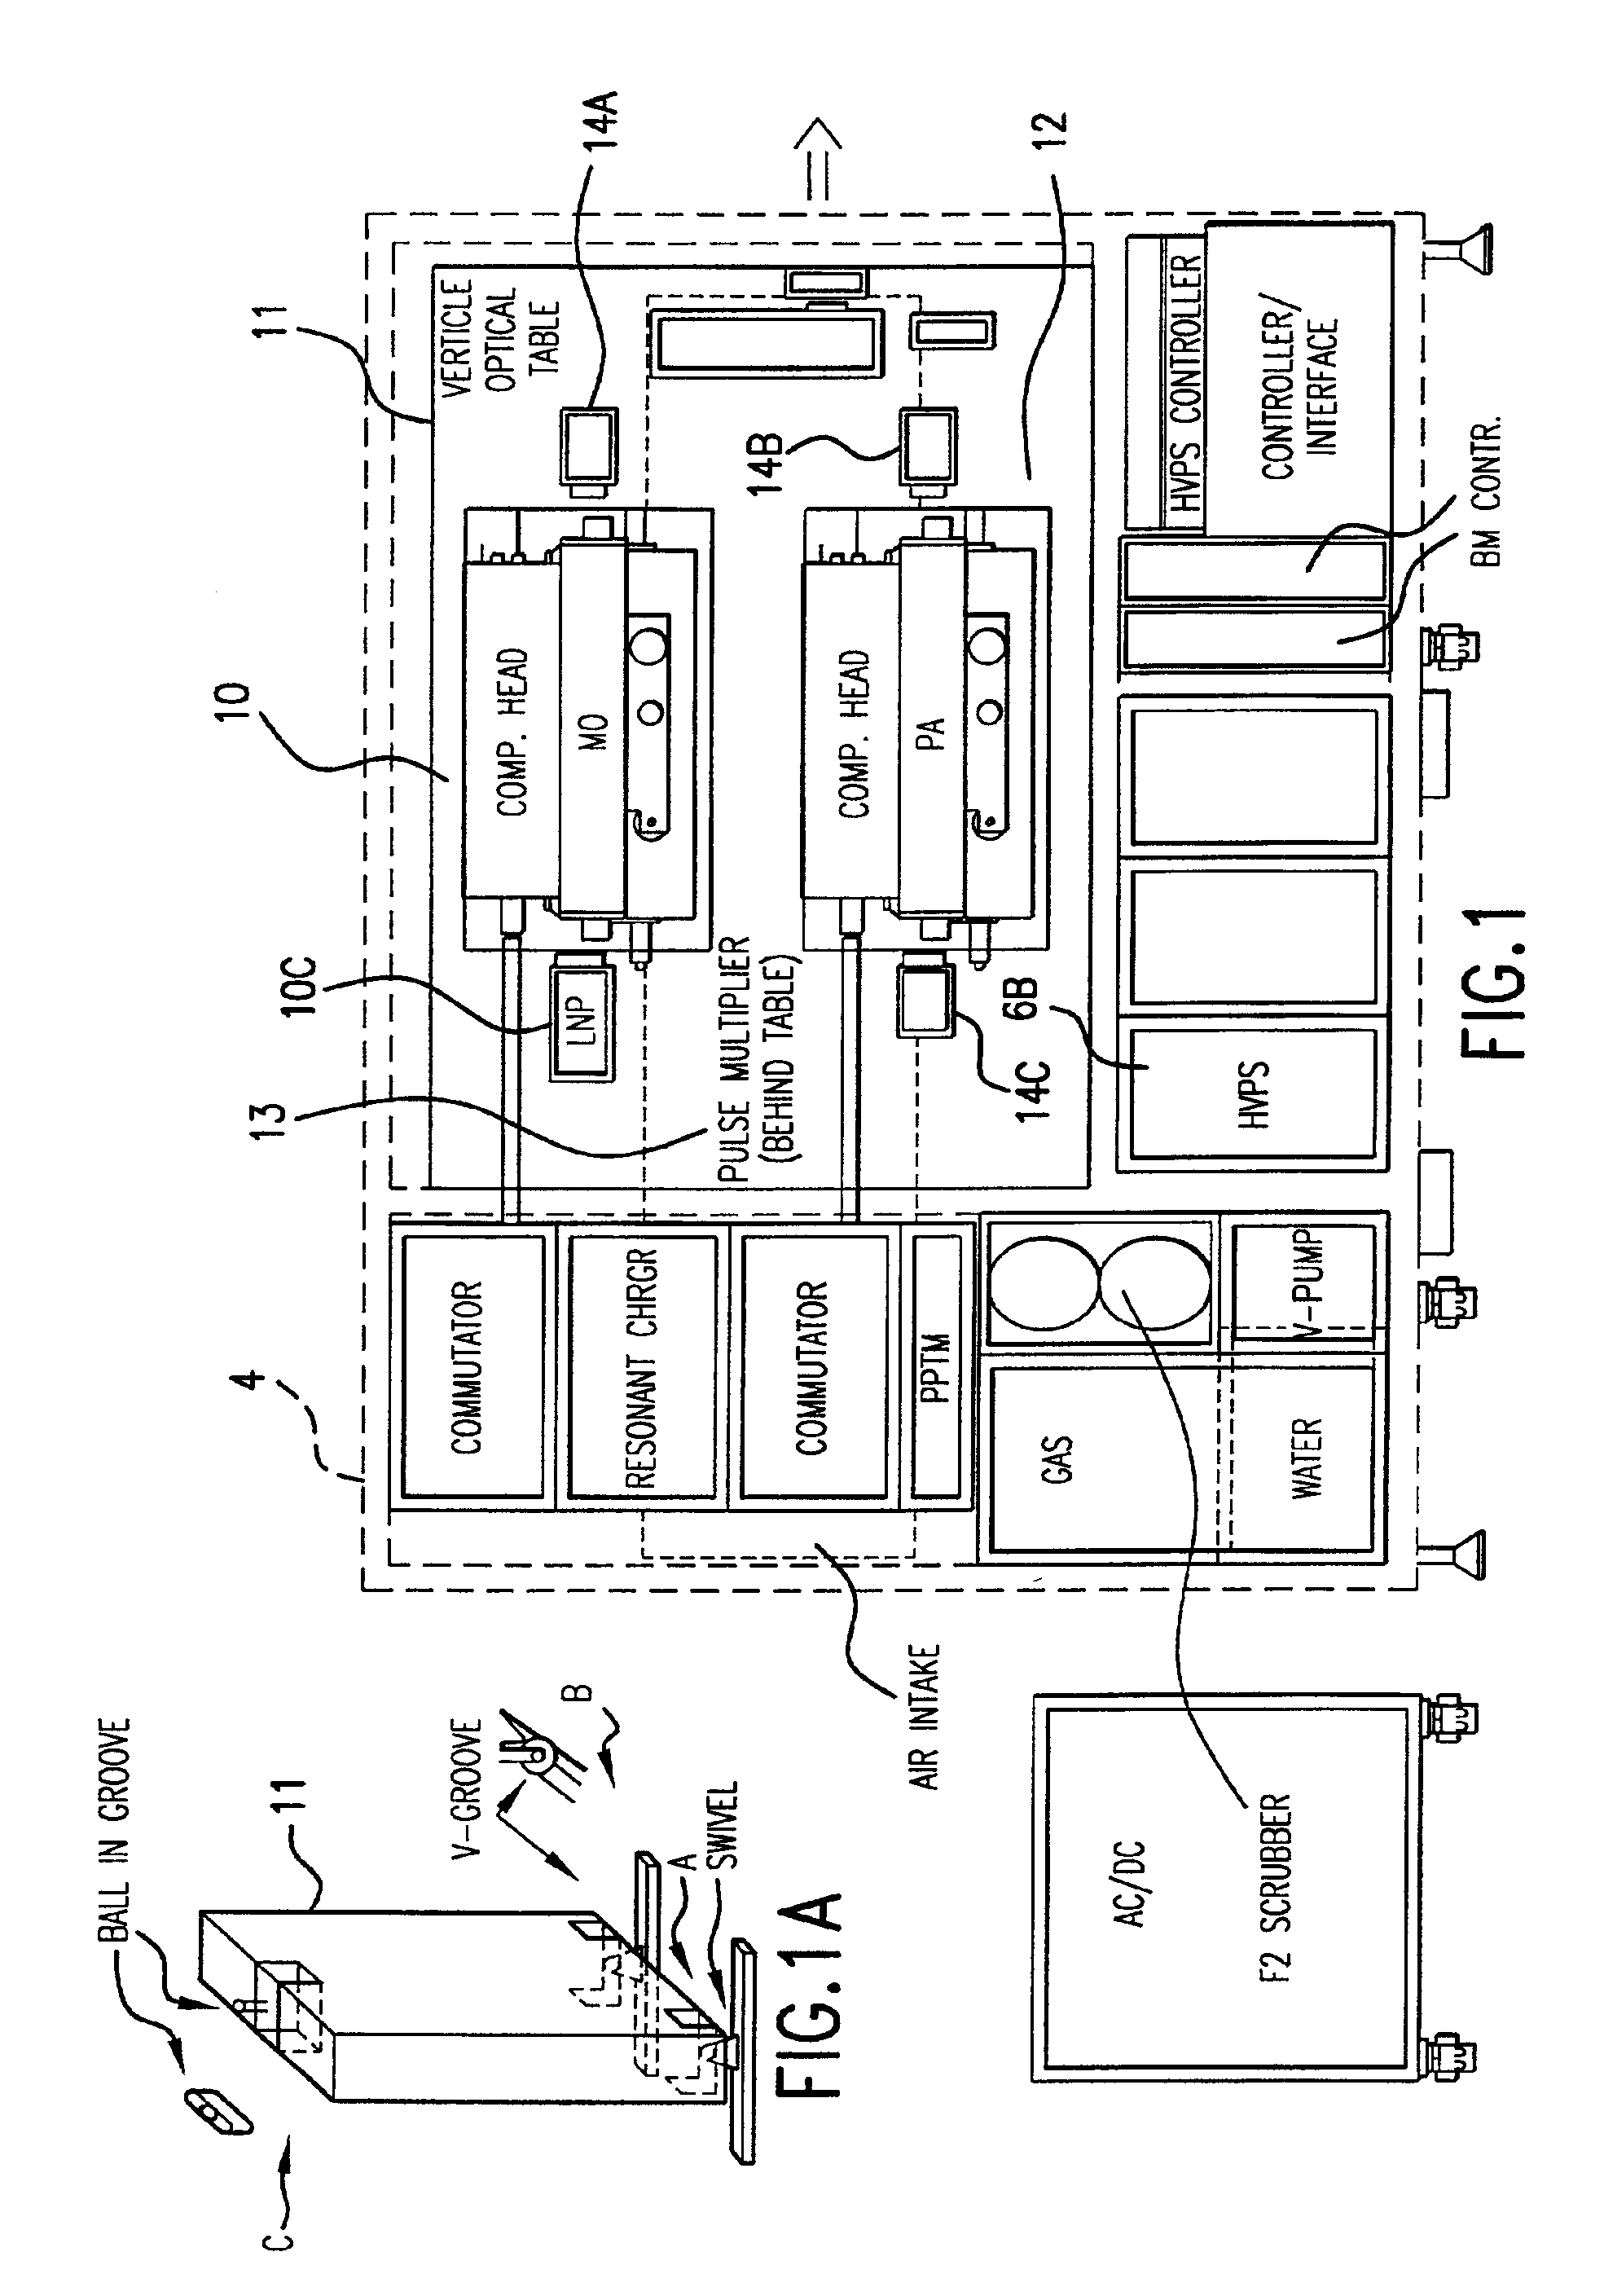 Timing control for two-chamber gas discharge laser system